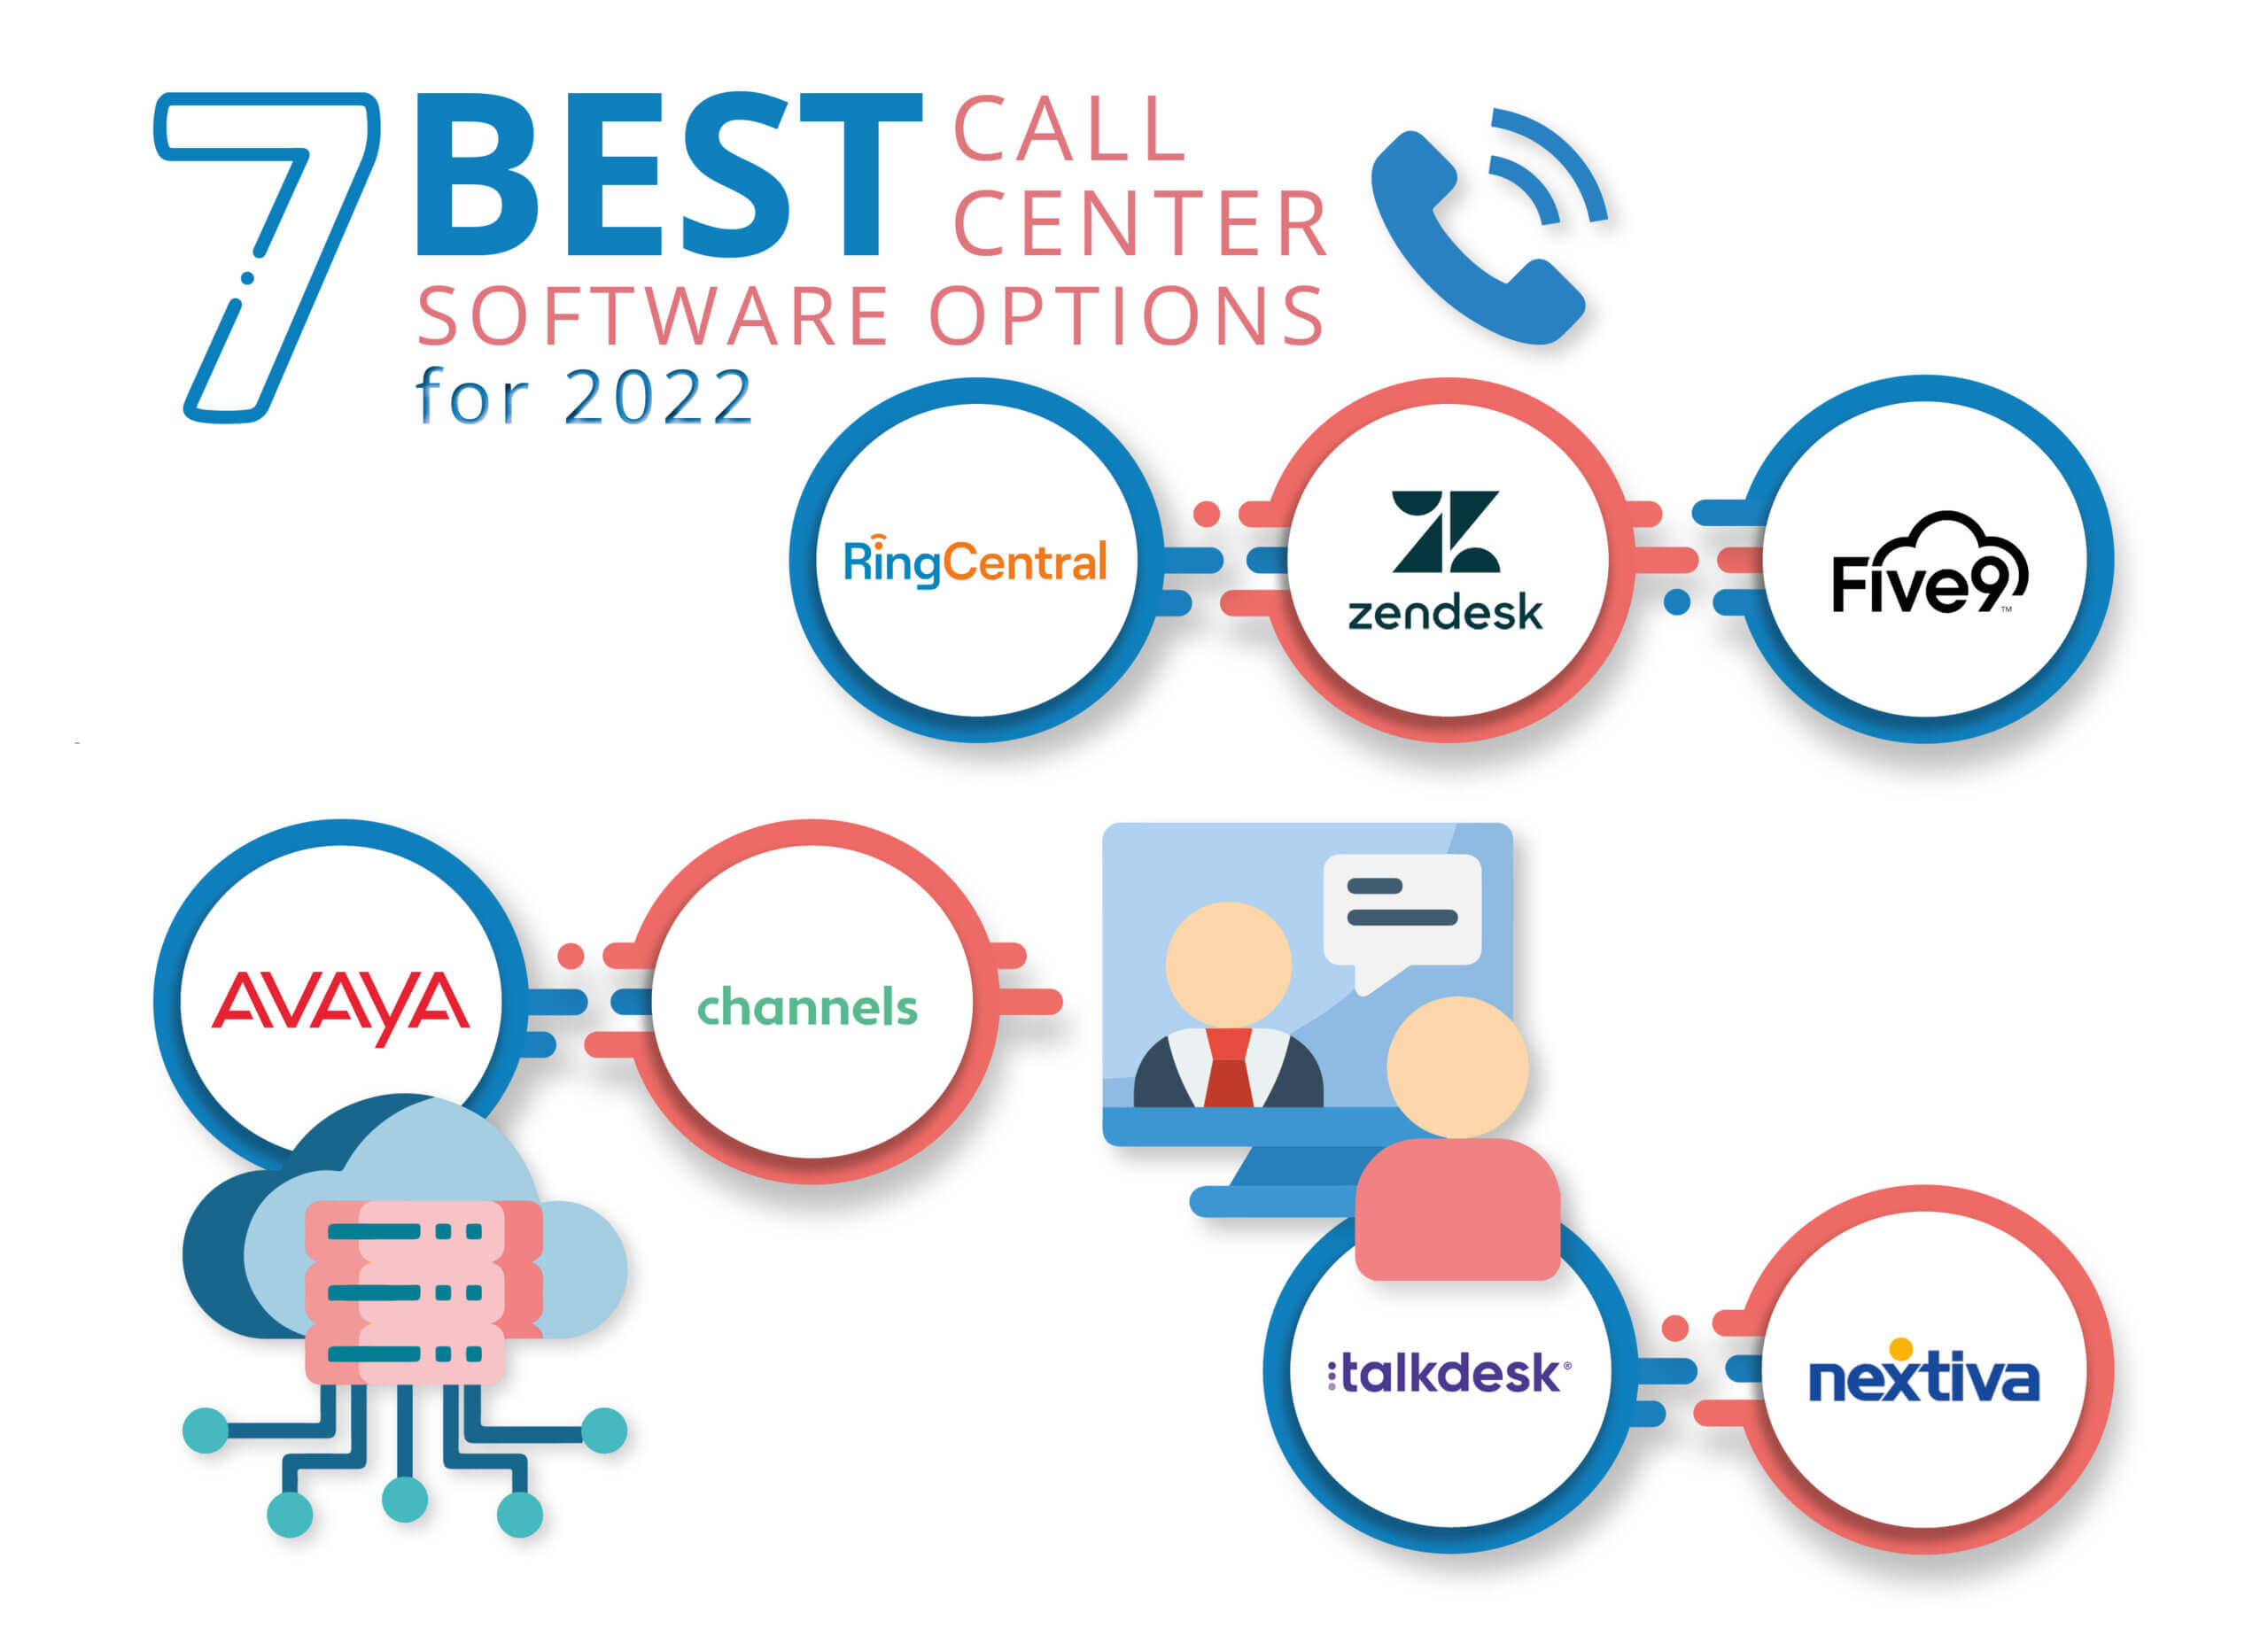 The 7 Best Call Center Software Options for 2023